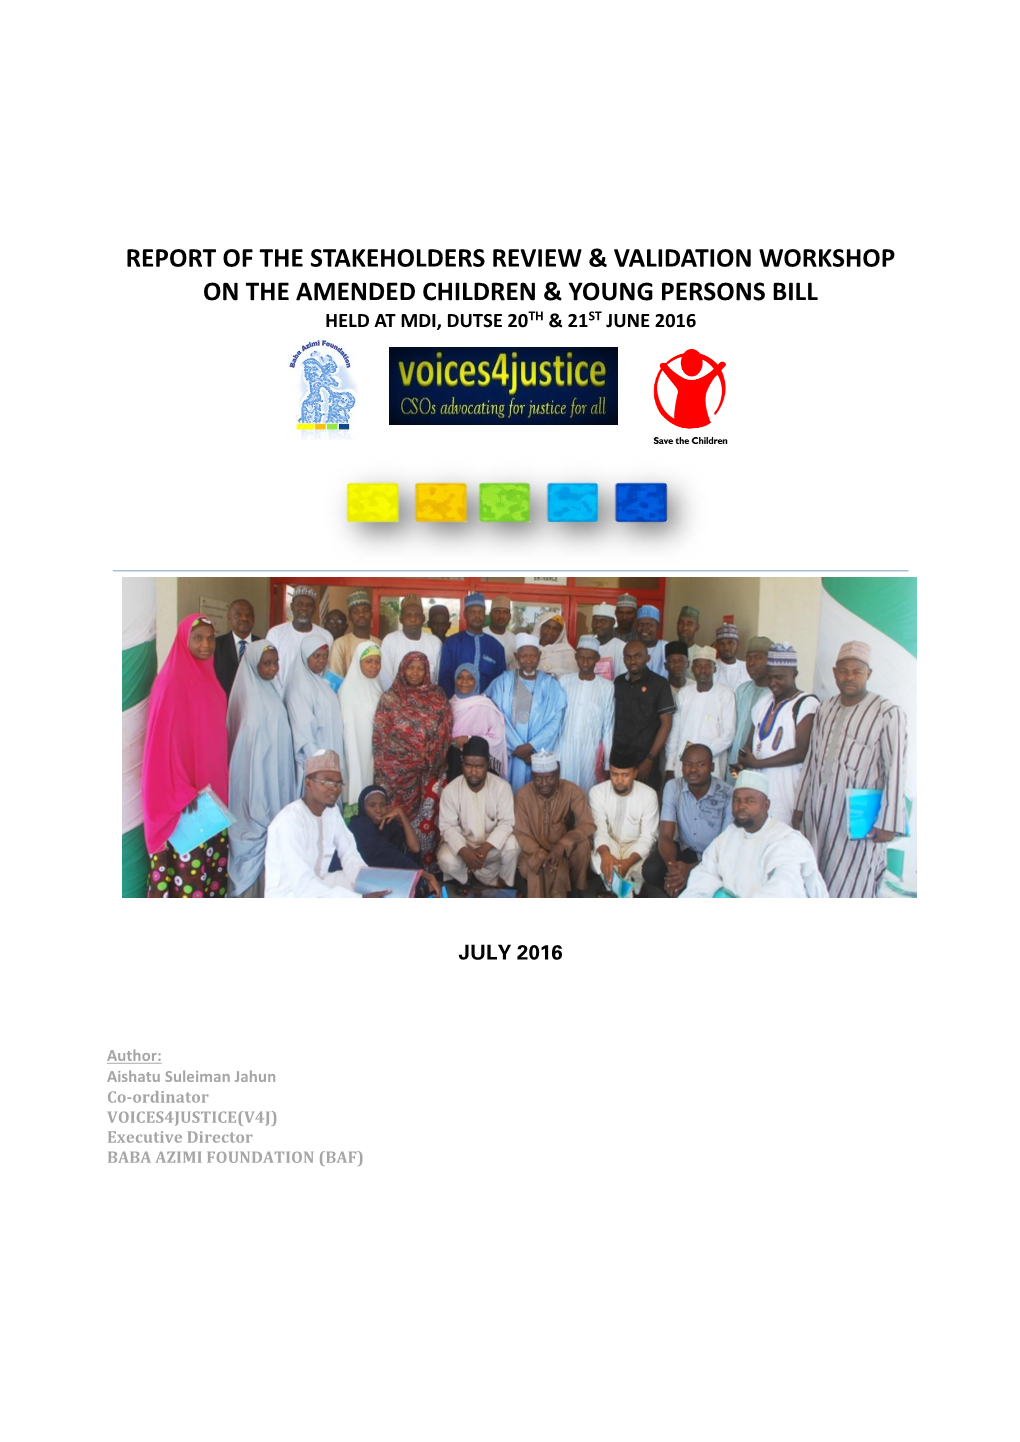 Report of the Stakeholders Review & Validation Workshop on The